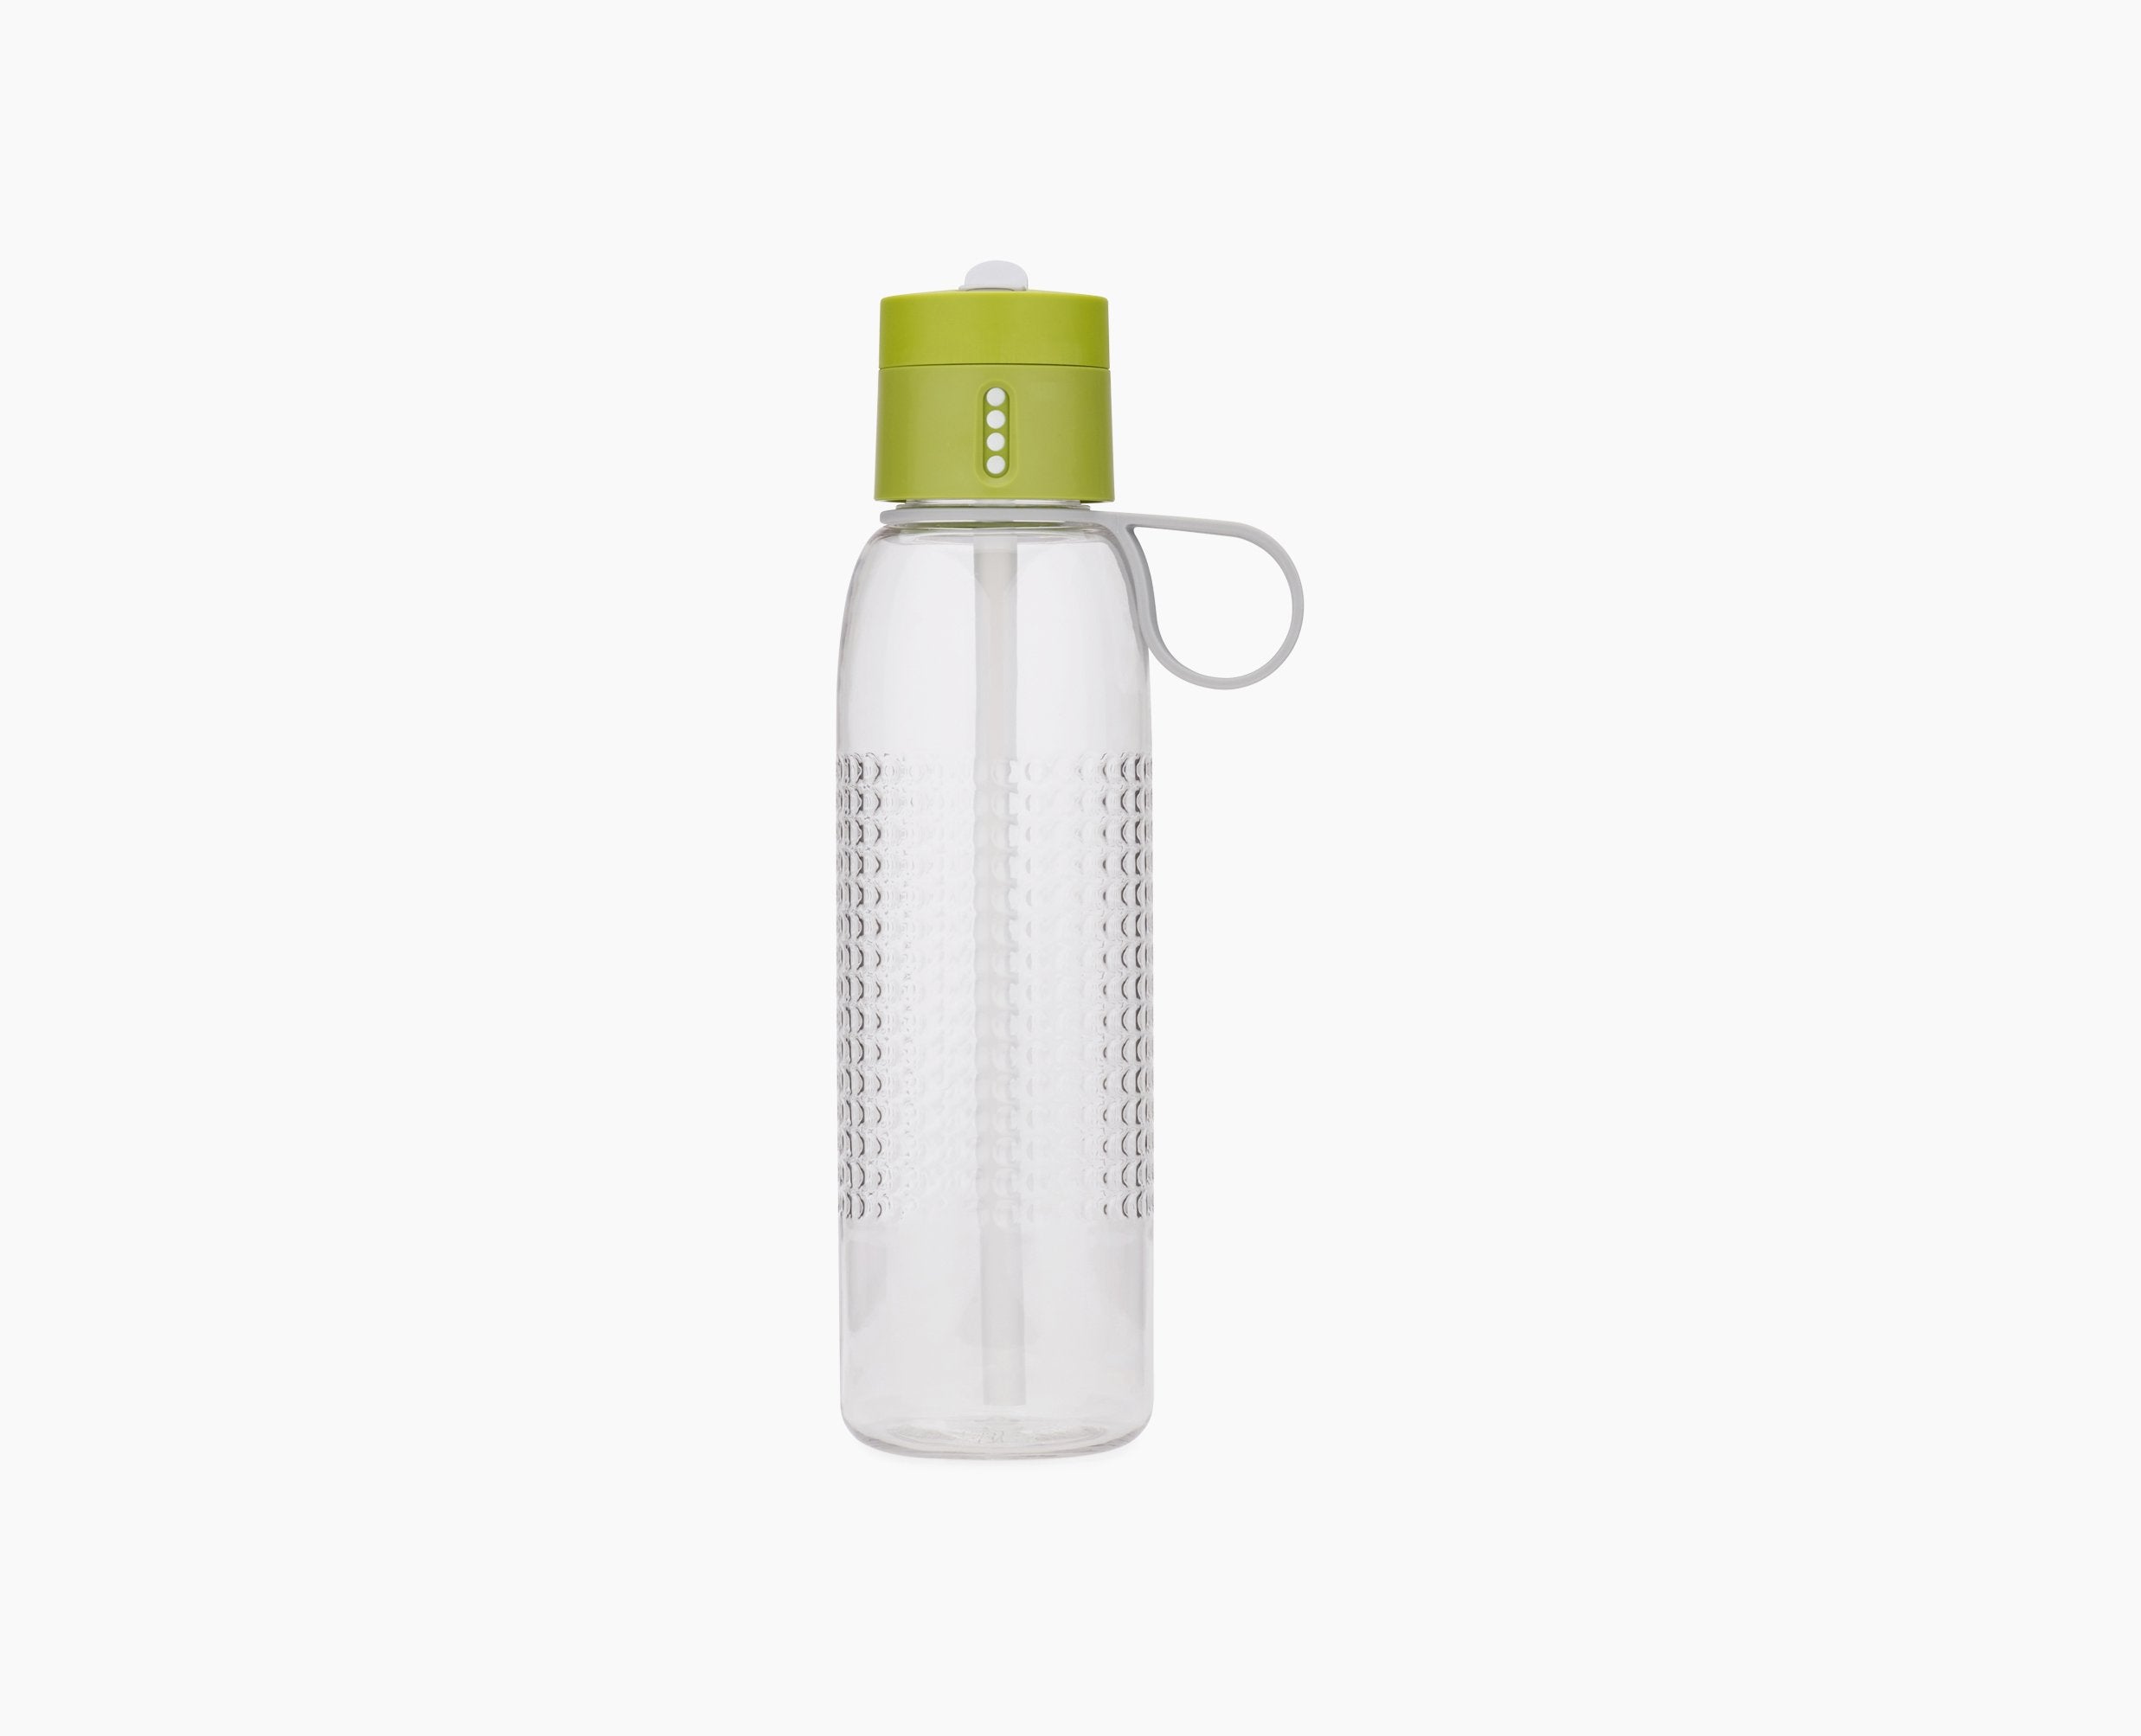 BEON.COM.AU  Track your daily hydration goals with this cleverly designed water bottle. The lid displays a new dot each time you refill so you can easily keep count of the number of bottles you drink.  Leakproof lid records number of bottles drunk New dot appears every time you refill and close lid Made from... Joseph Joseph at BEON.COM.AU